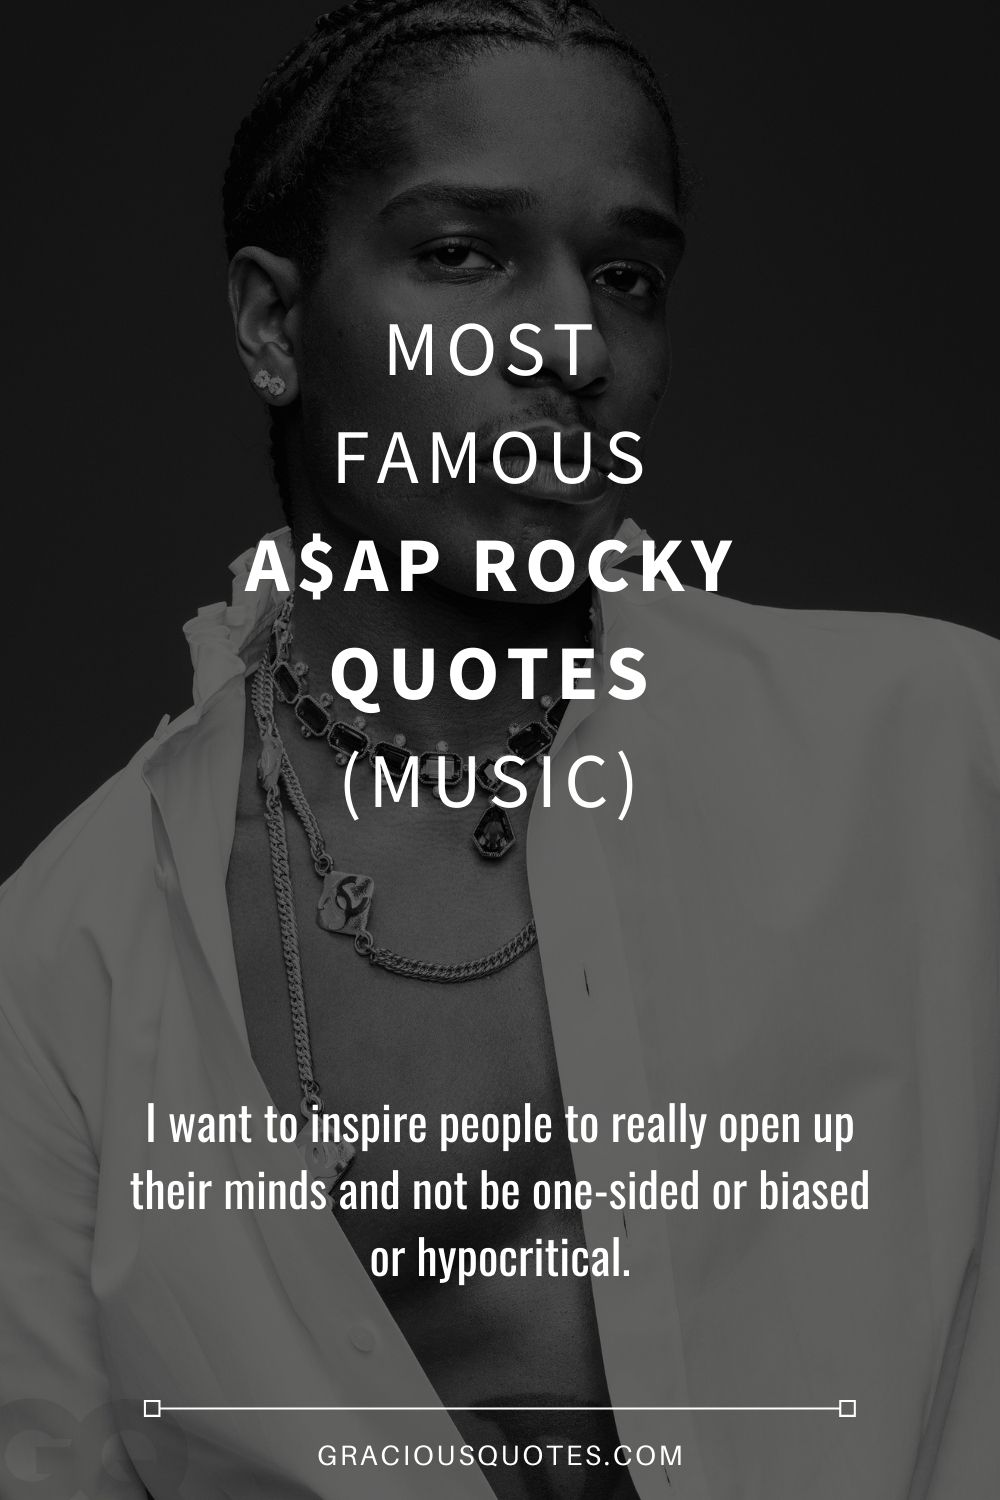 Most Famous A$AP Rocky Quotes (MUSIC) - Gracious Quotes